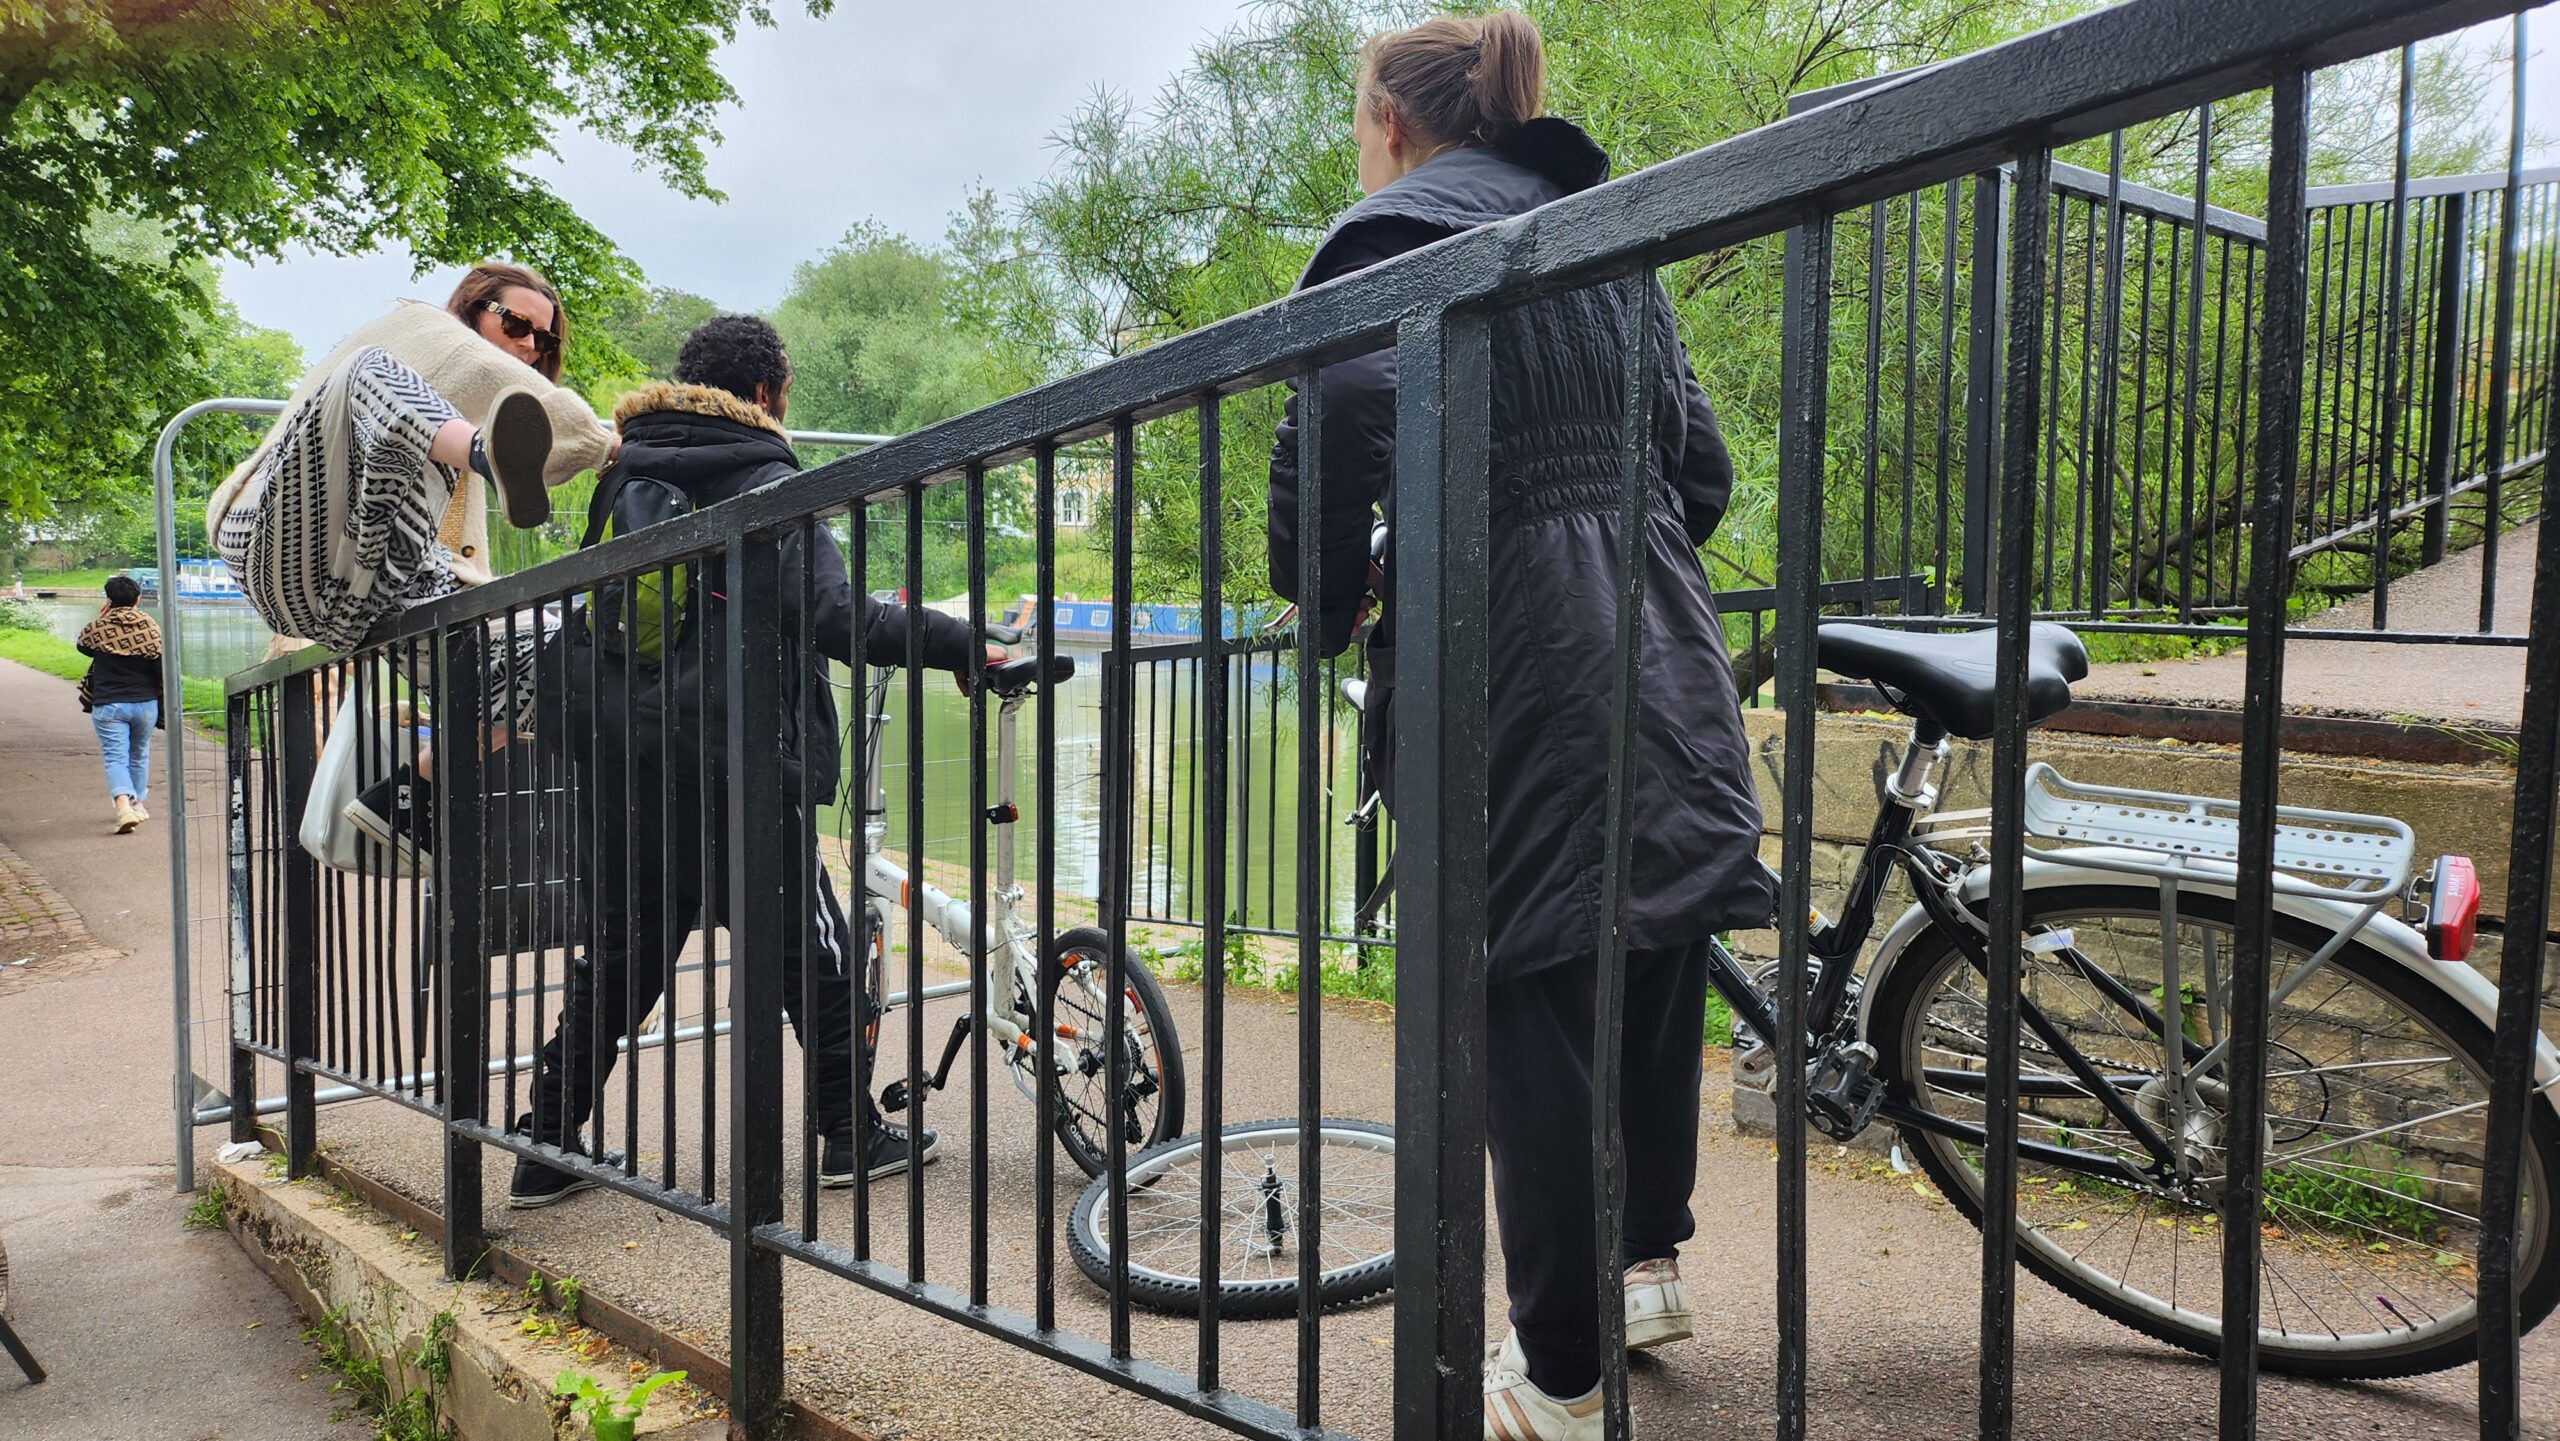 Jesus Green Lock footbridge (above) has reopened, to the delight of residents and Cambridge Beer festival goers. PHOTO: Camcycle